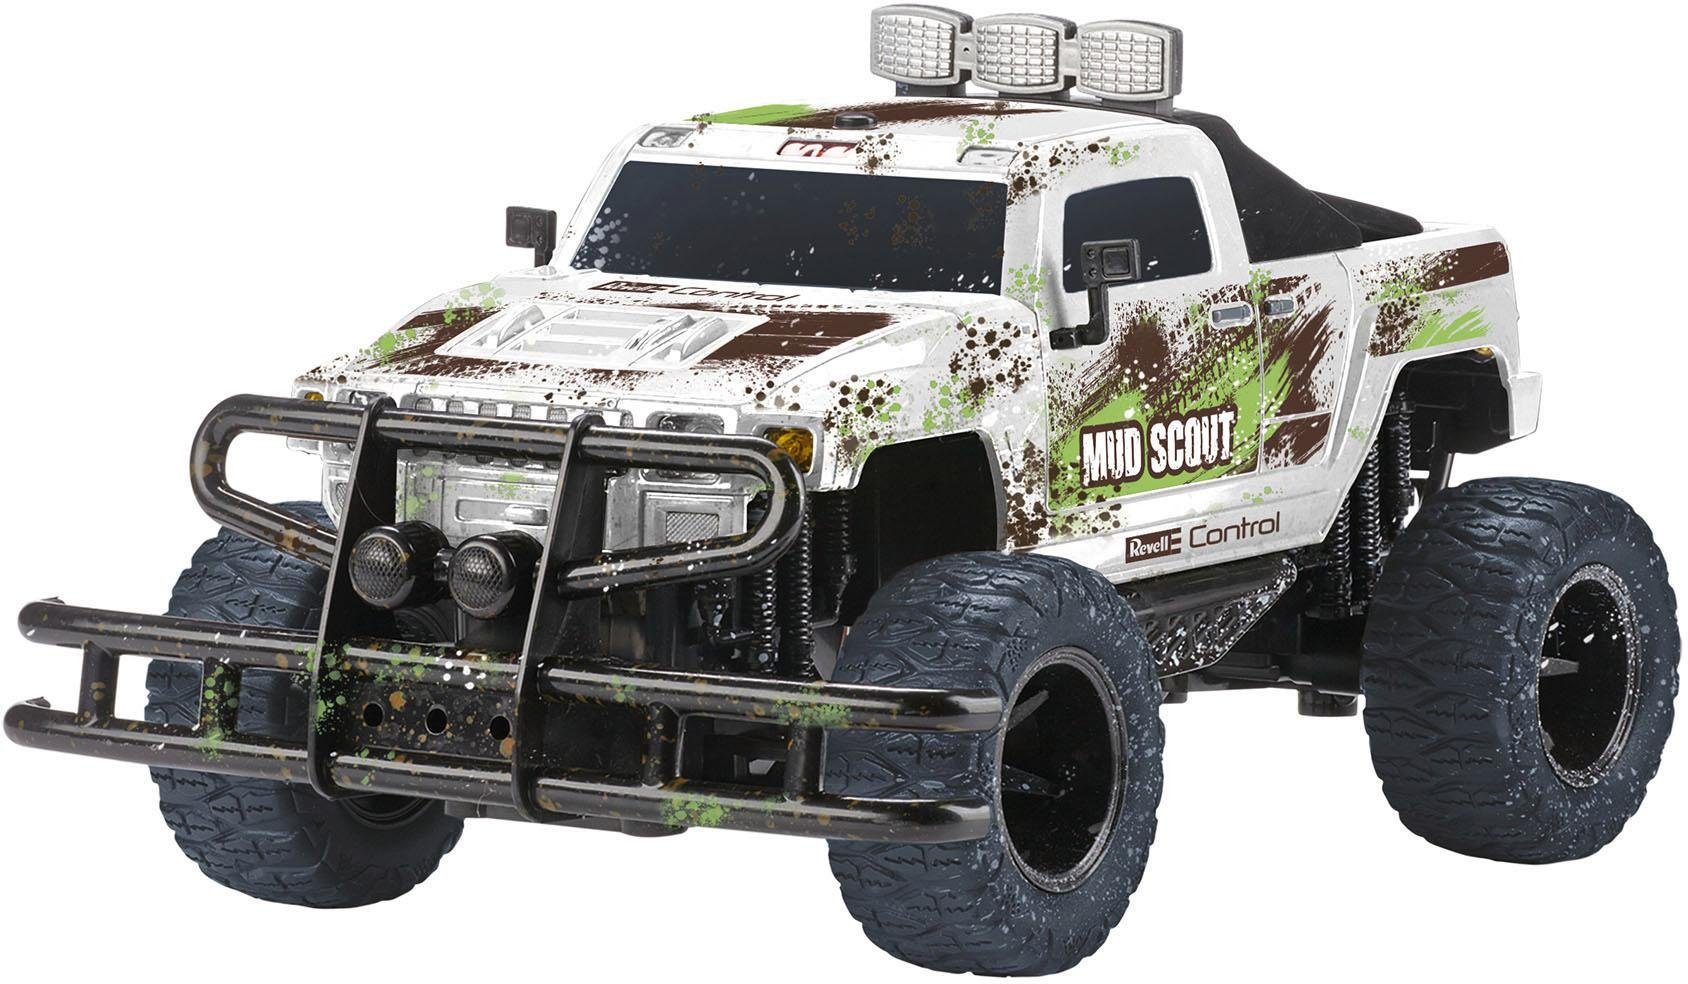 Revell® control, Monster Revell® Truck Scout Mud RC-Truck